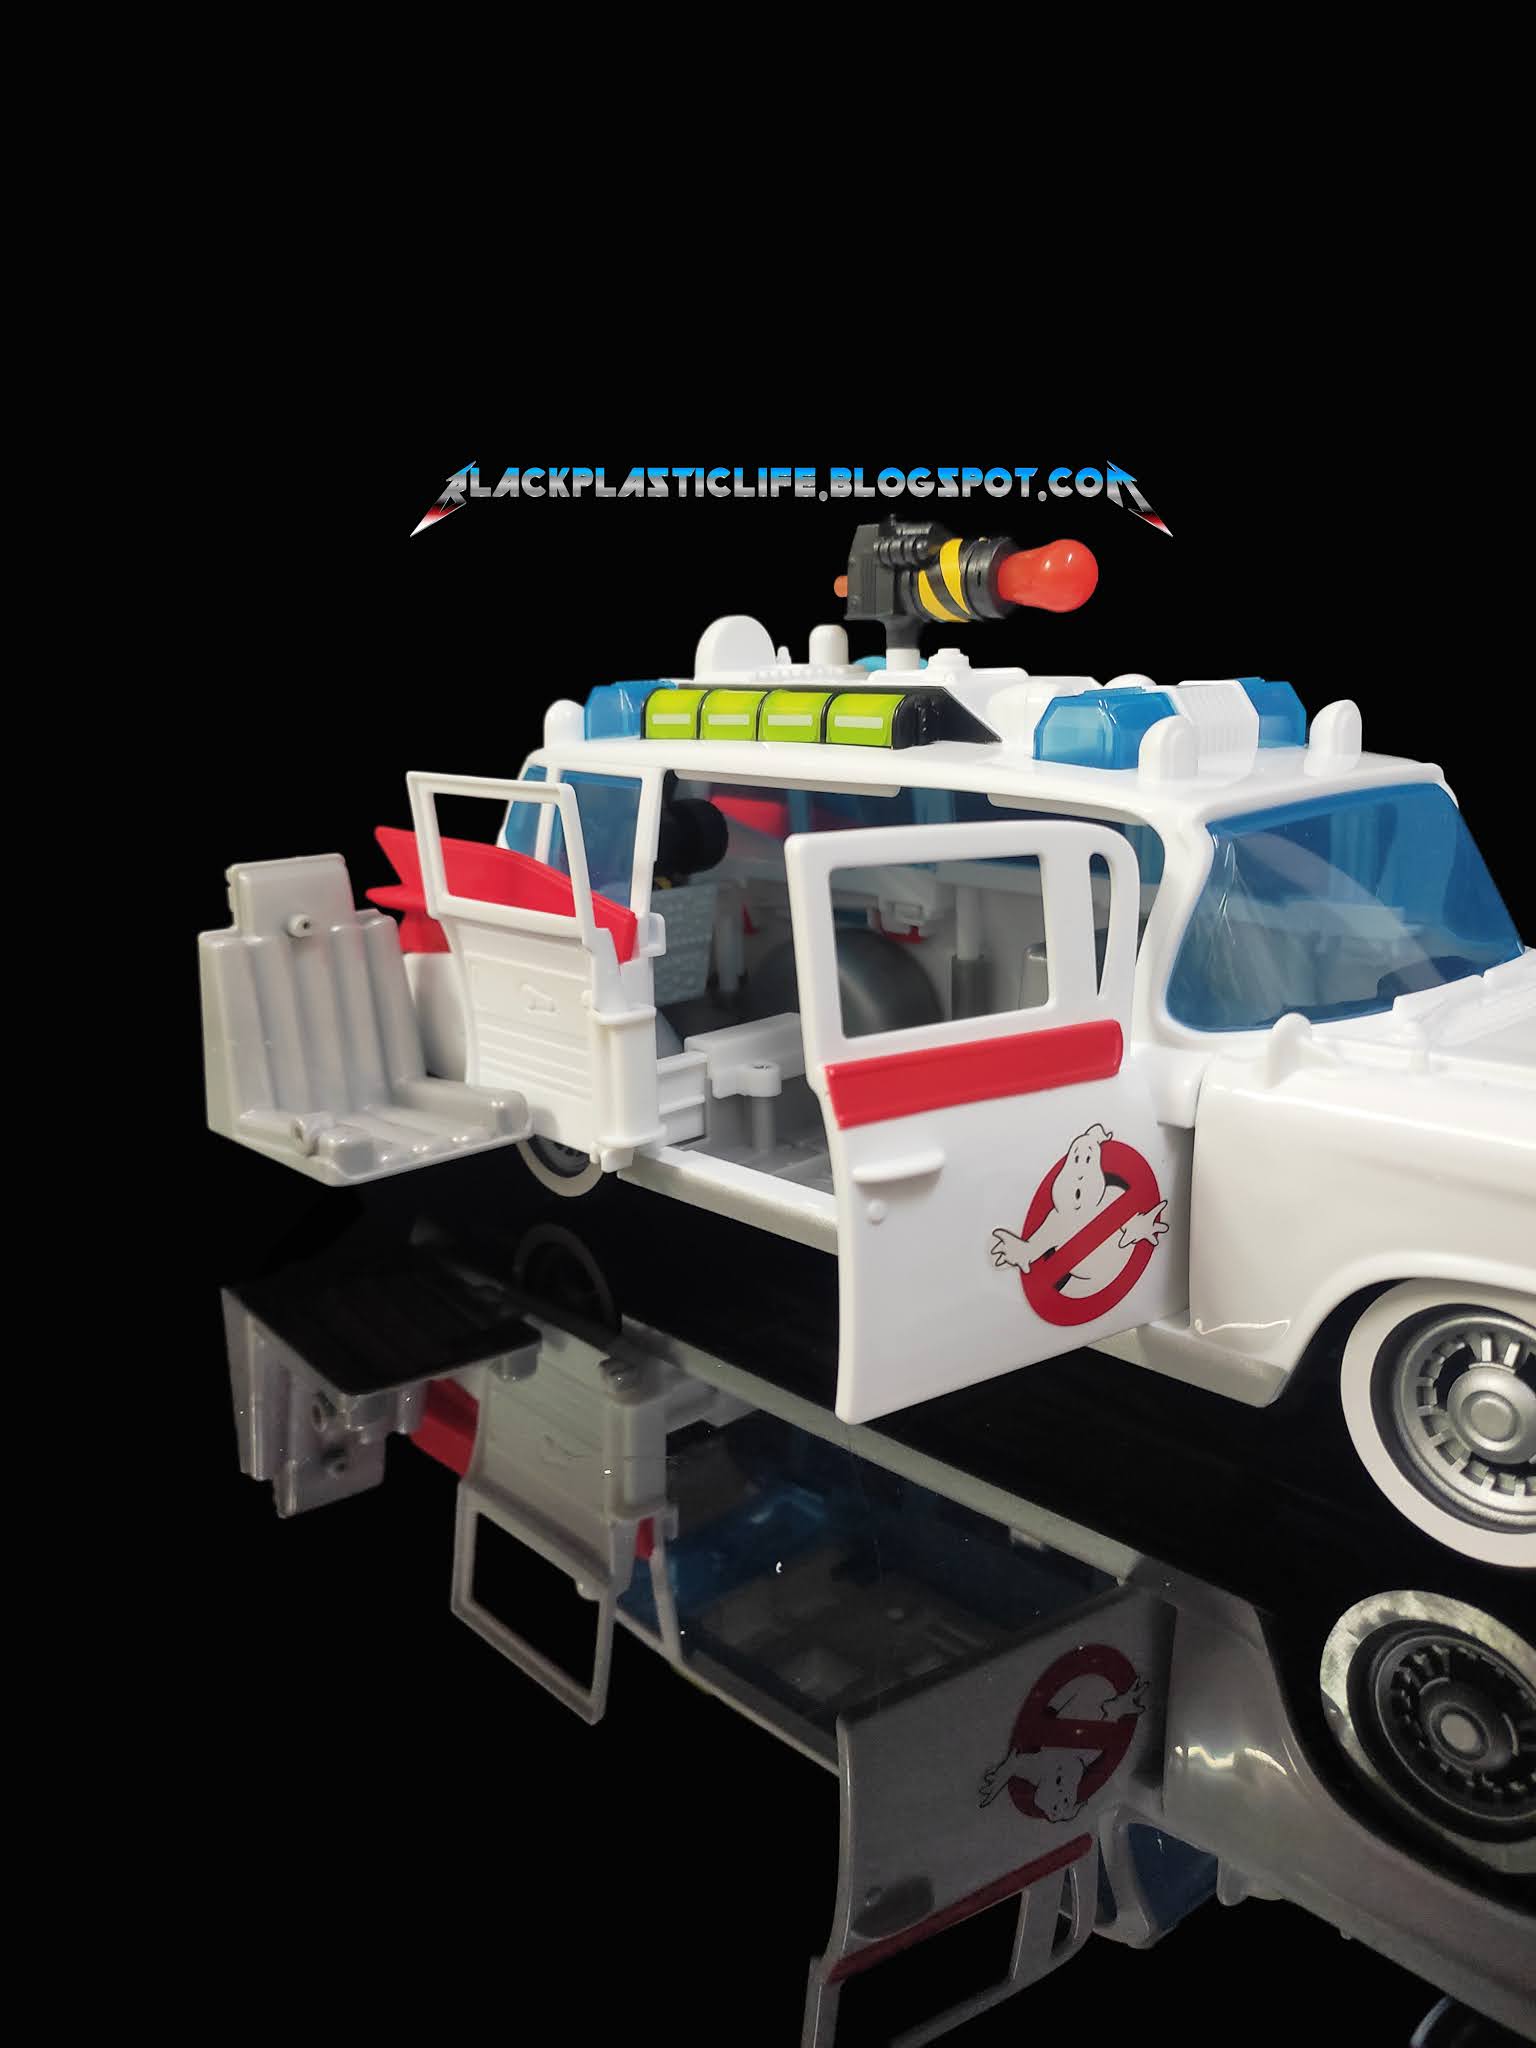 Ghostbusters Movie Ecto-1 Playset with Accessories 